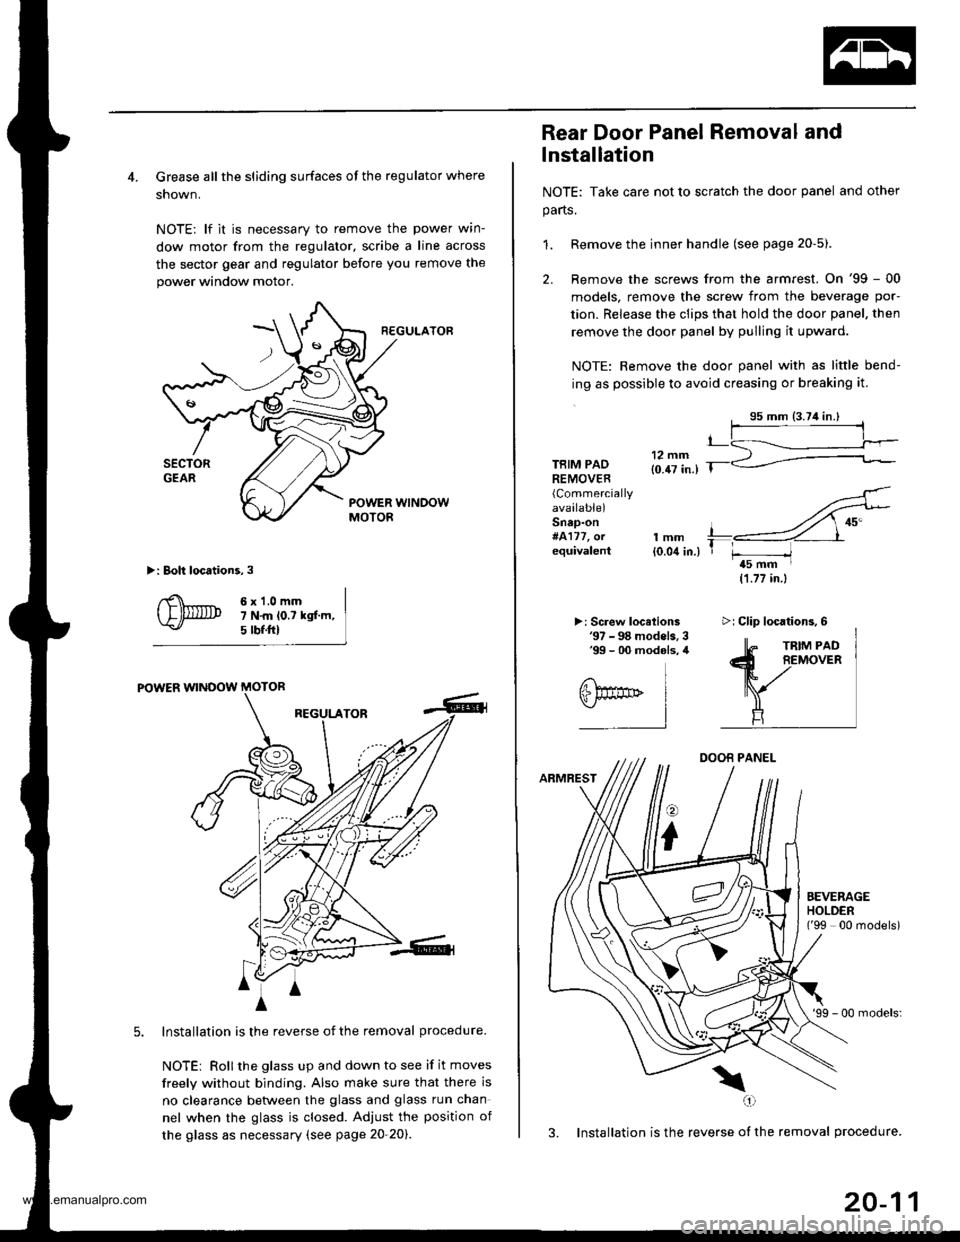 HONDA CR-V 1998 RD1-RD3 / 1.G Workshop Manual 
4. Grease all the sliding surfaces of the regulator where
shown.
NOTE: lf it is necessary to remove the power wrn-
dow motor from the regulator, scribe a line across
the sector gear and regulator bef